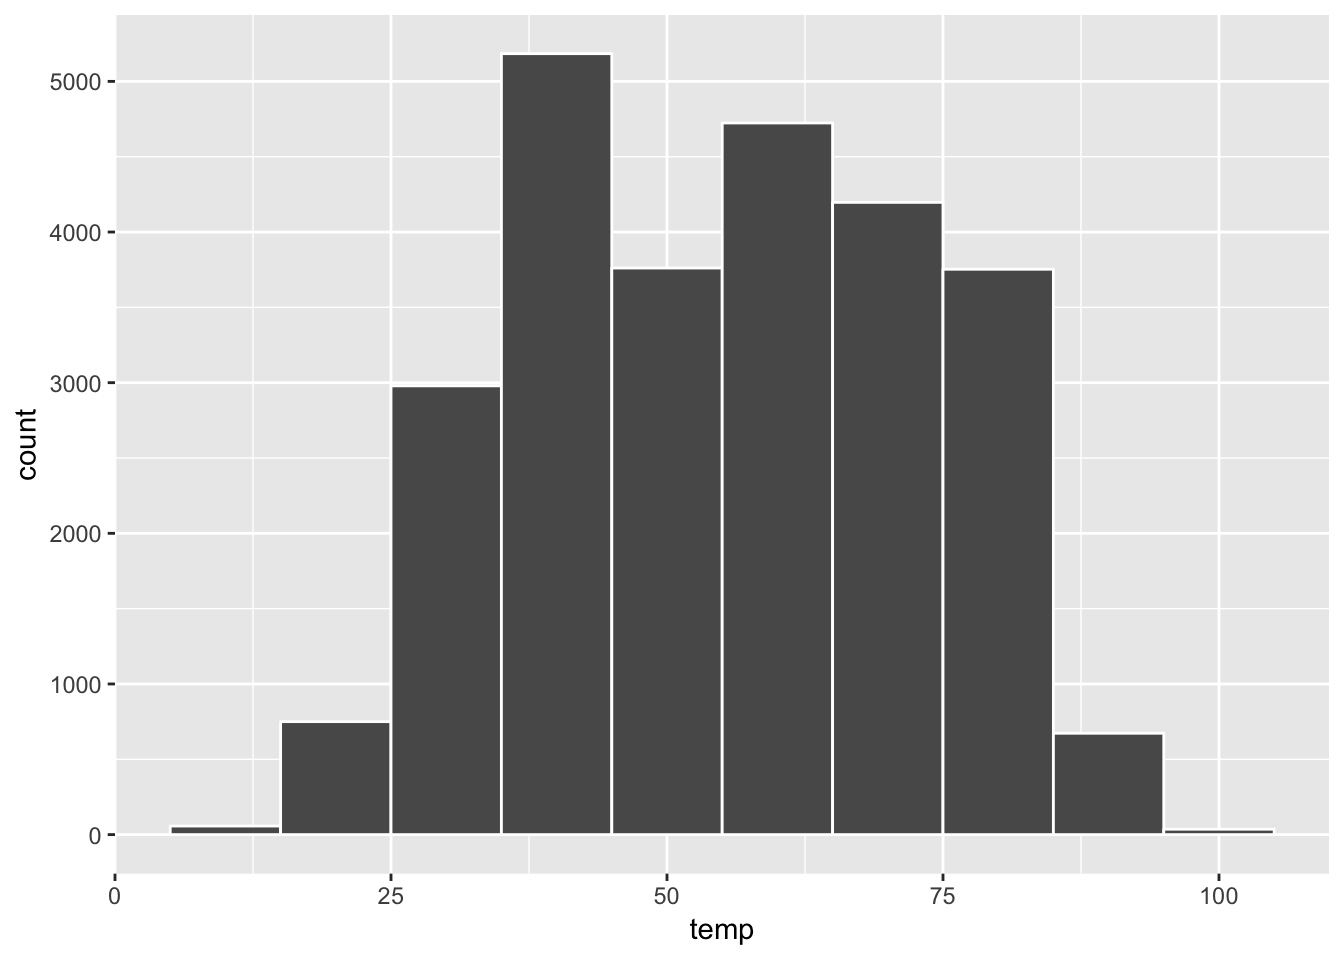 Histogram of Hourly Temperature Recordings from NYC in 2013 - Binwidth = 10